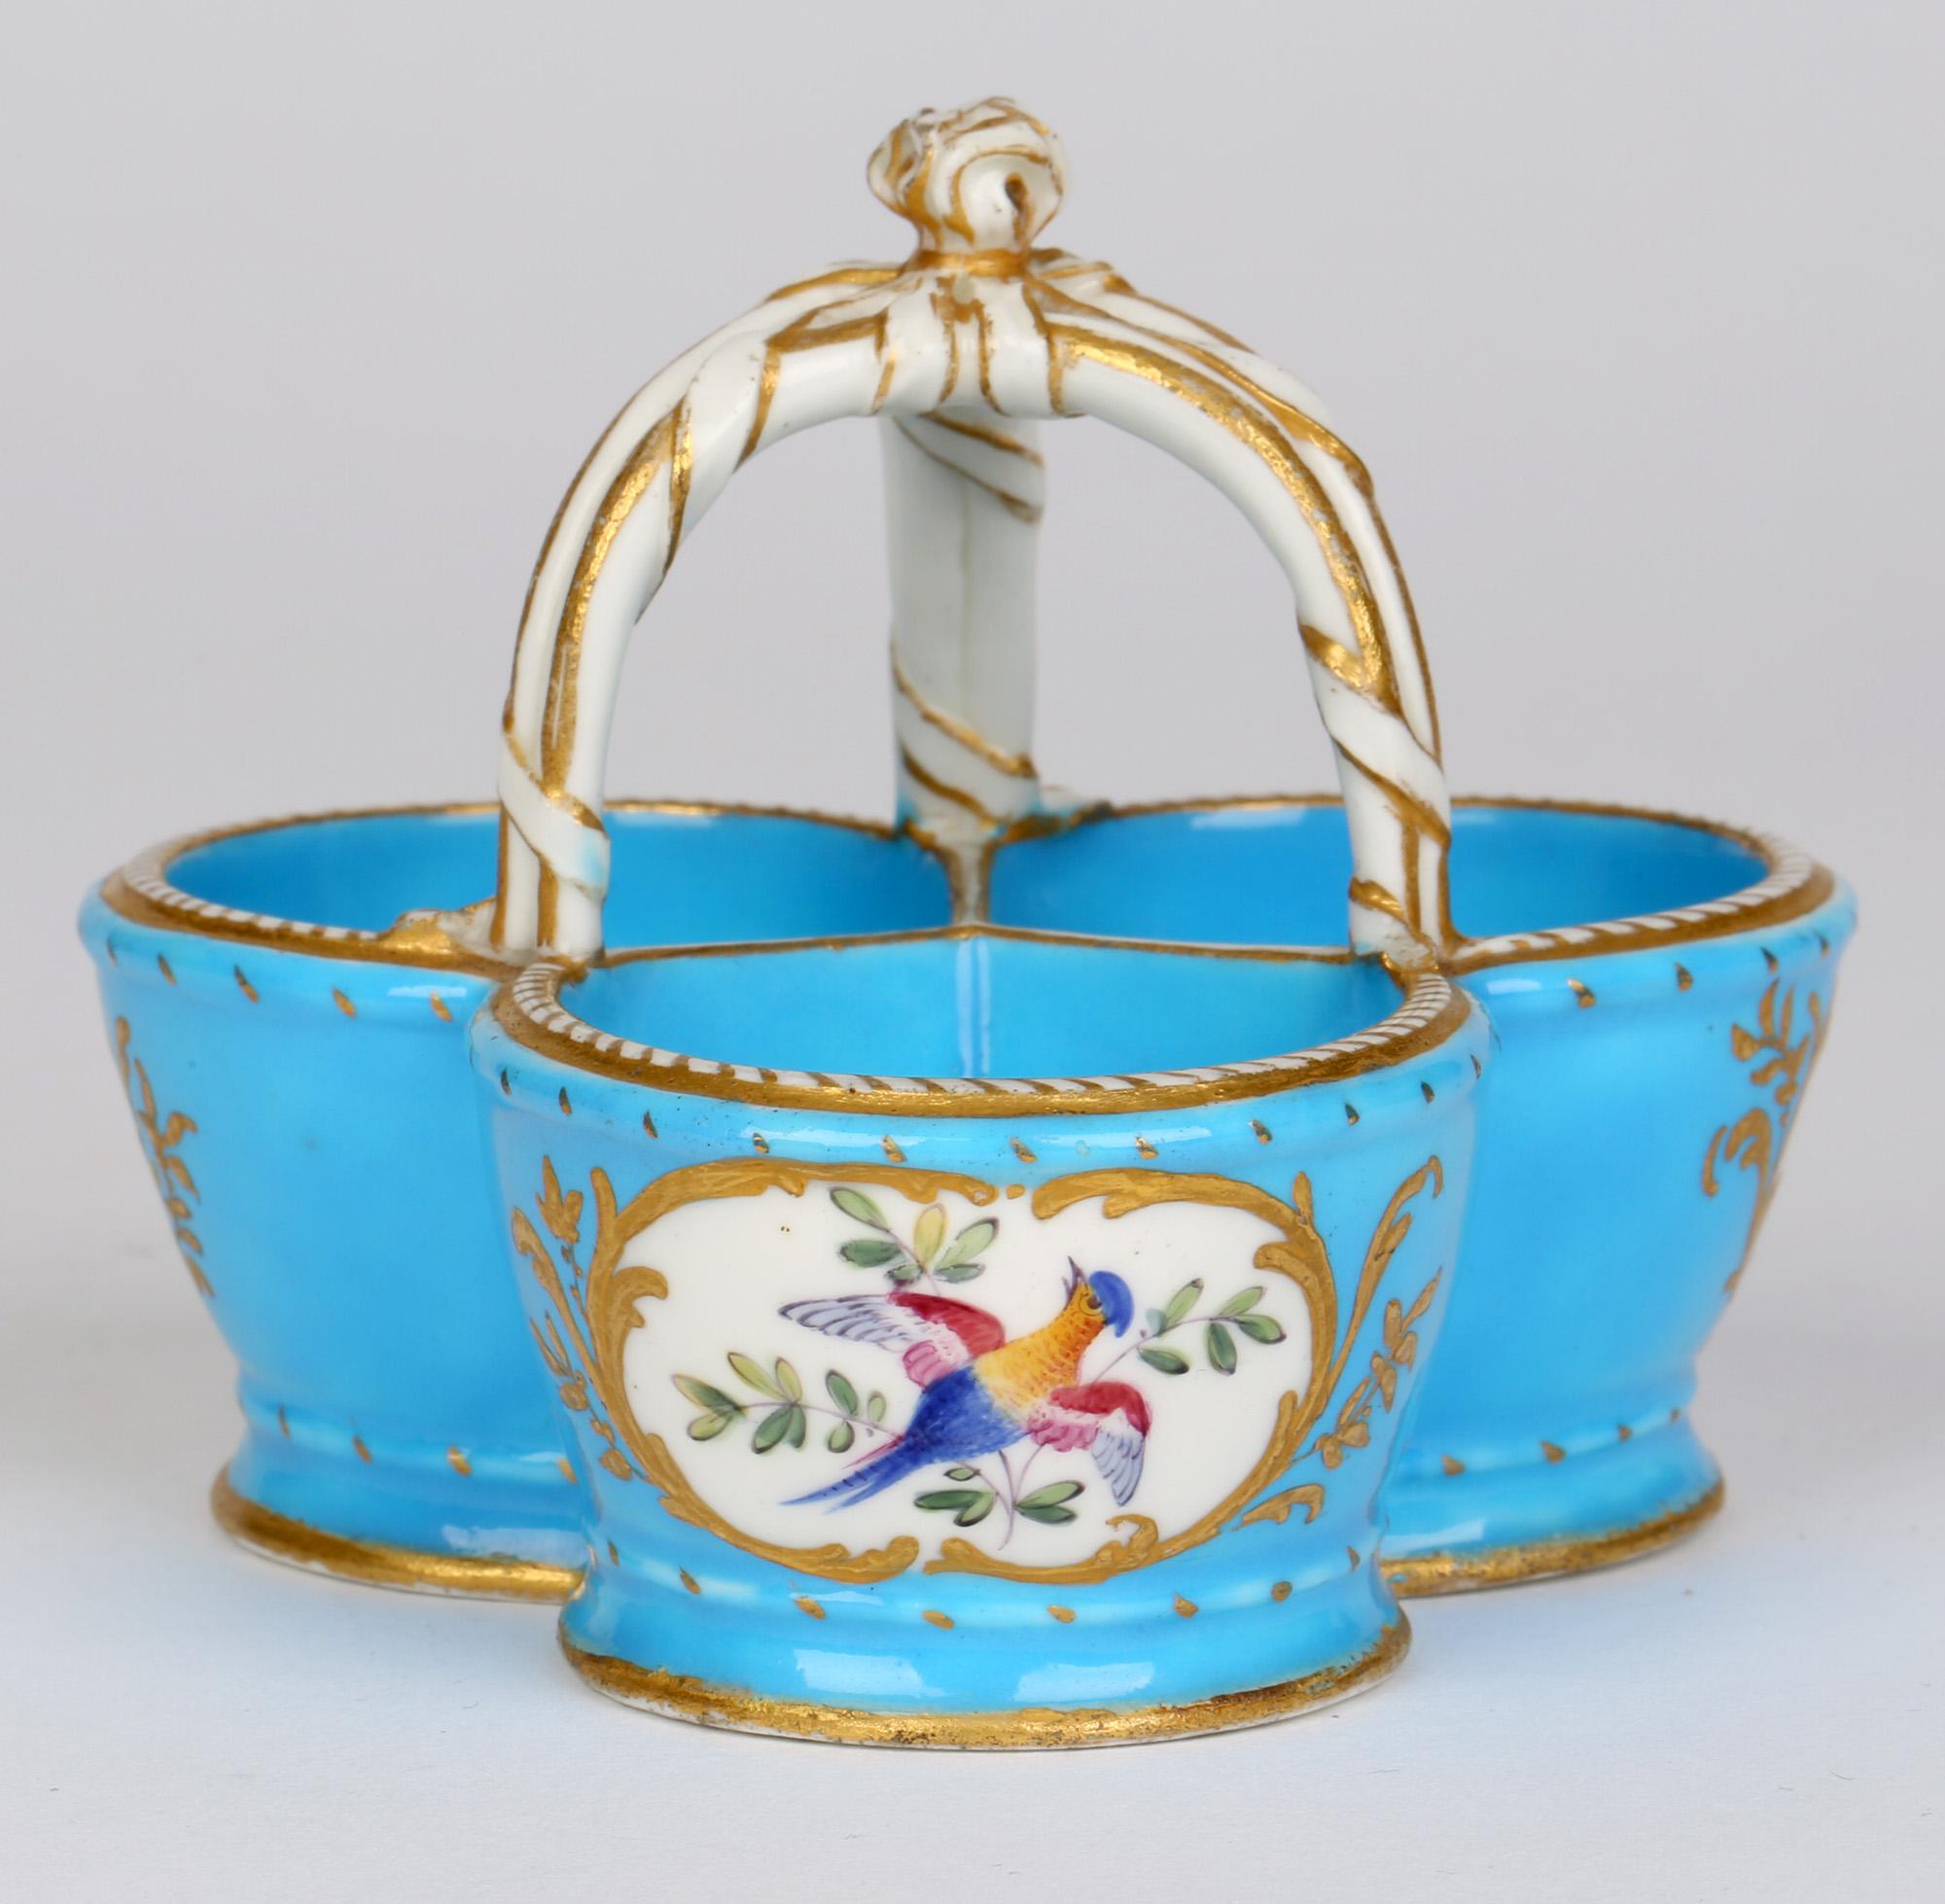 French antique porcelain triple handled salt in the Bleu Céleste (heavenly blue) design by Sèvres and hand painted by Theodore dating between 1765 and 1778. The salt comprises of three rounded compartments with a central raised triple stem handle